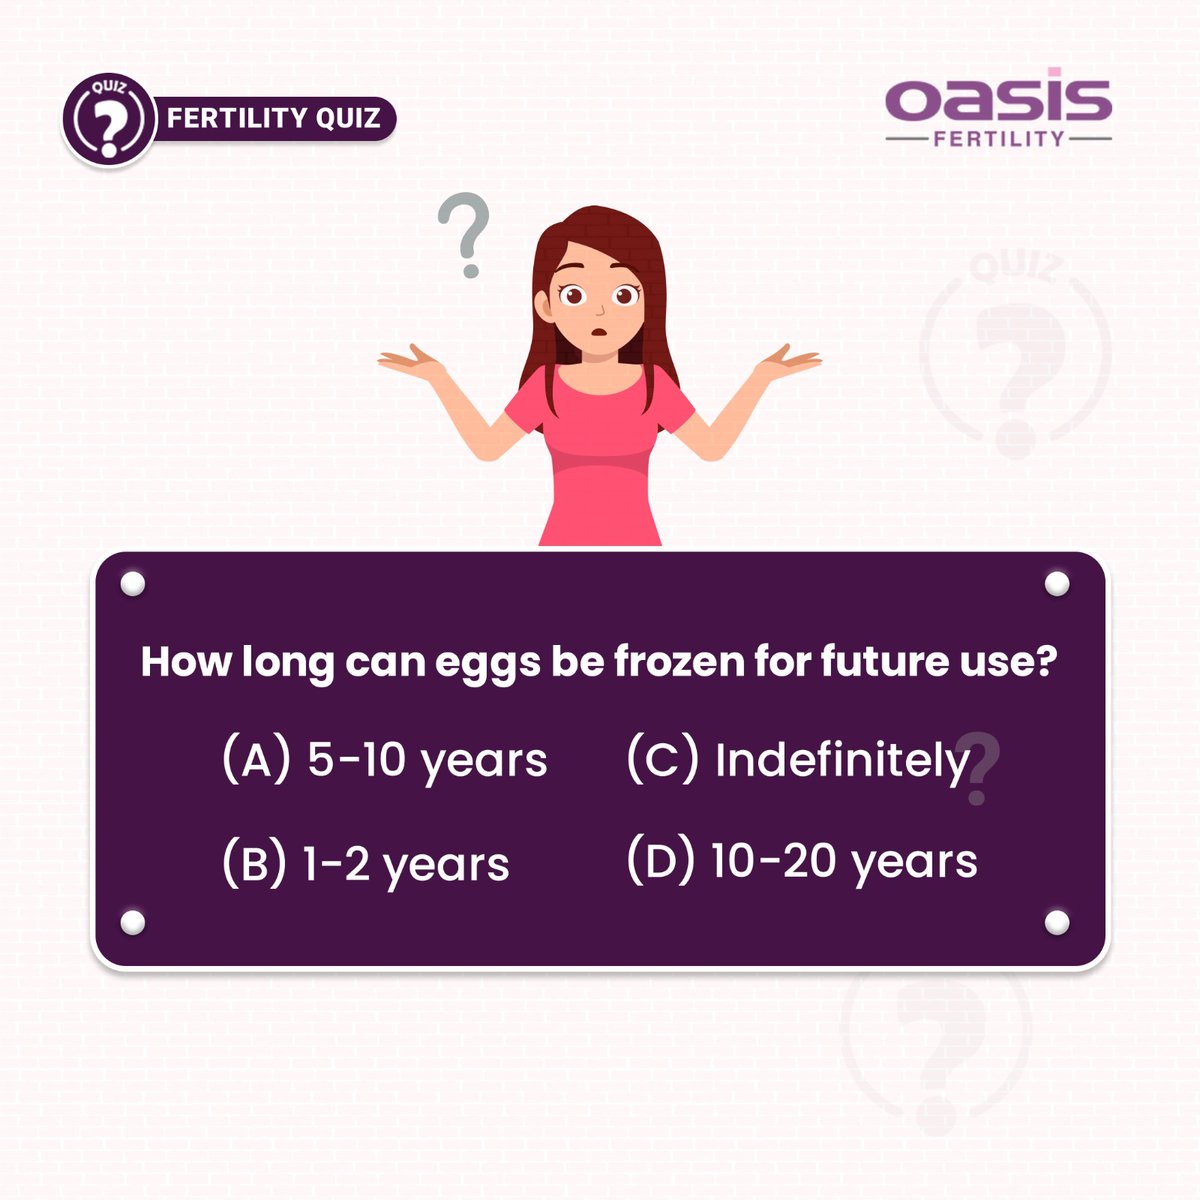 Did you know that you can preserve your fertility? Gain valuable insights with our #FertilityQuiz.

#FertilityQuiz #PreserveFertility #FertilityInsights #FertilityAwareness #FertilityJourney #FertilityTips #FertilityHealth #FertilityEducation #FertilitySupport #fertilitycommunity